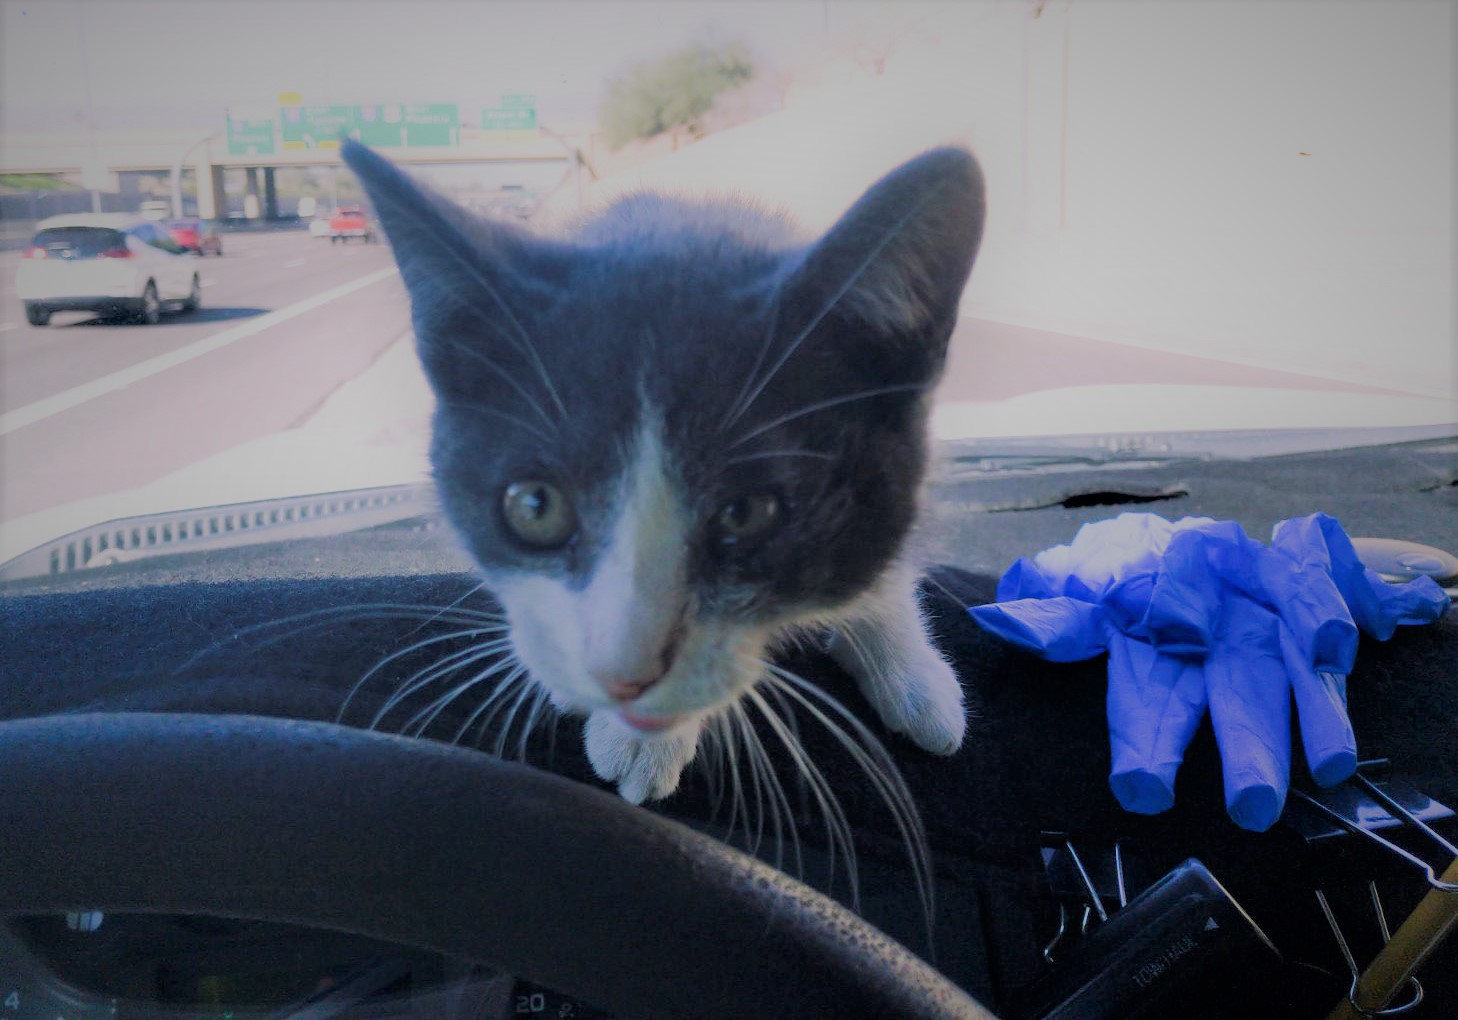 Millie finds new life thanks to ADOT